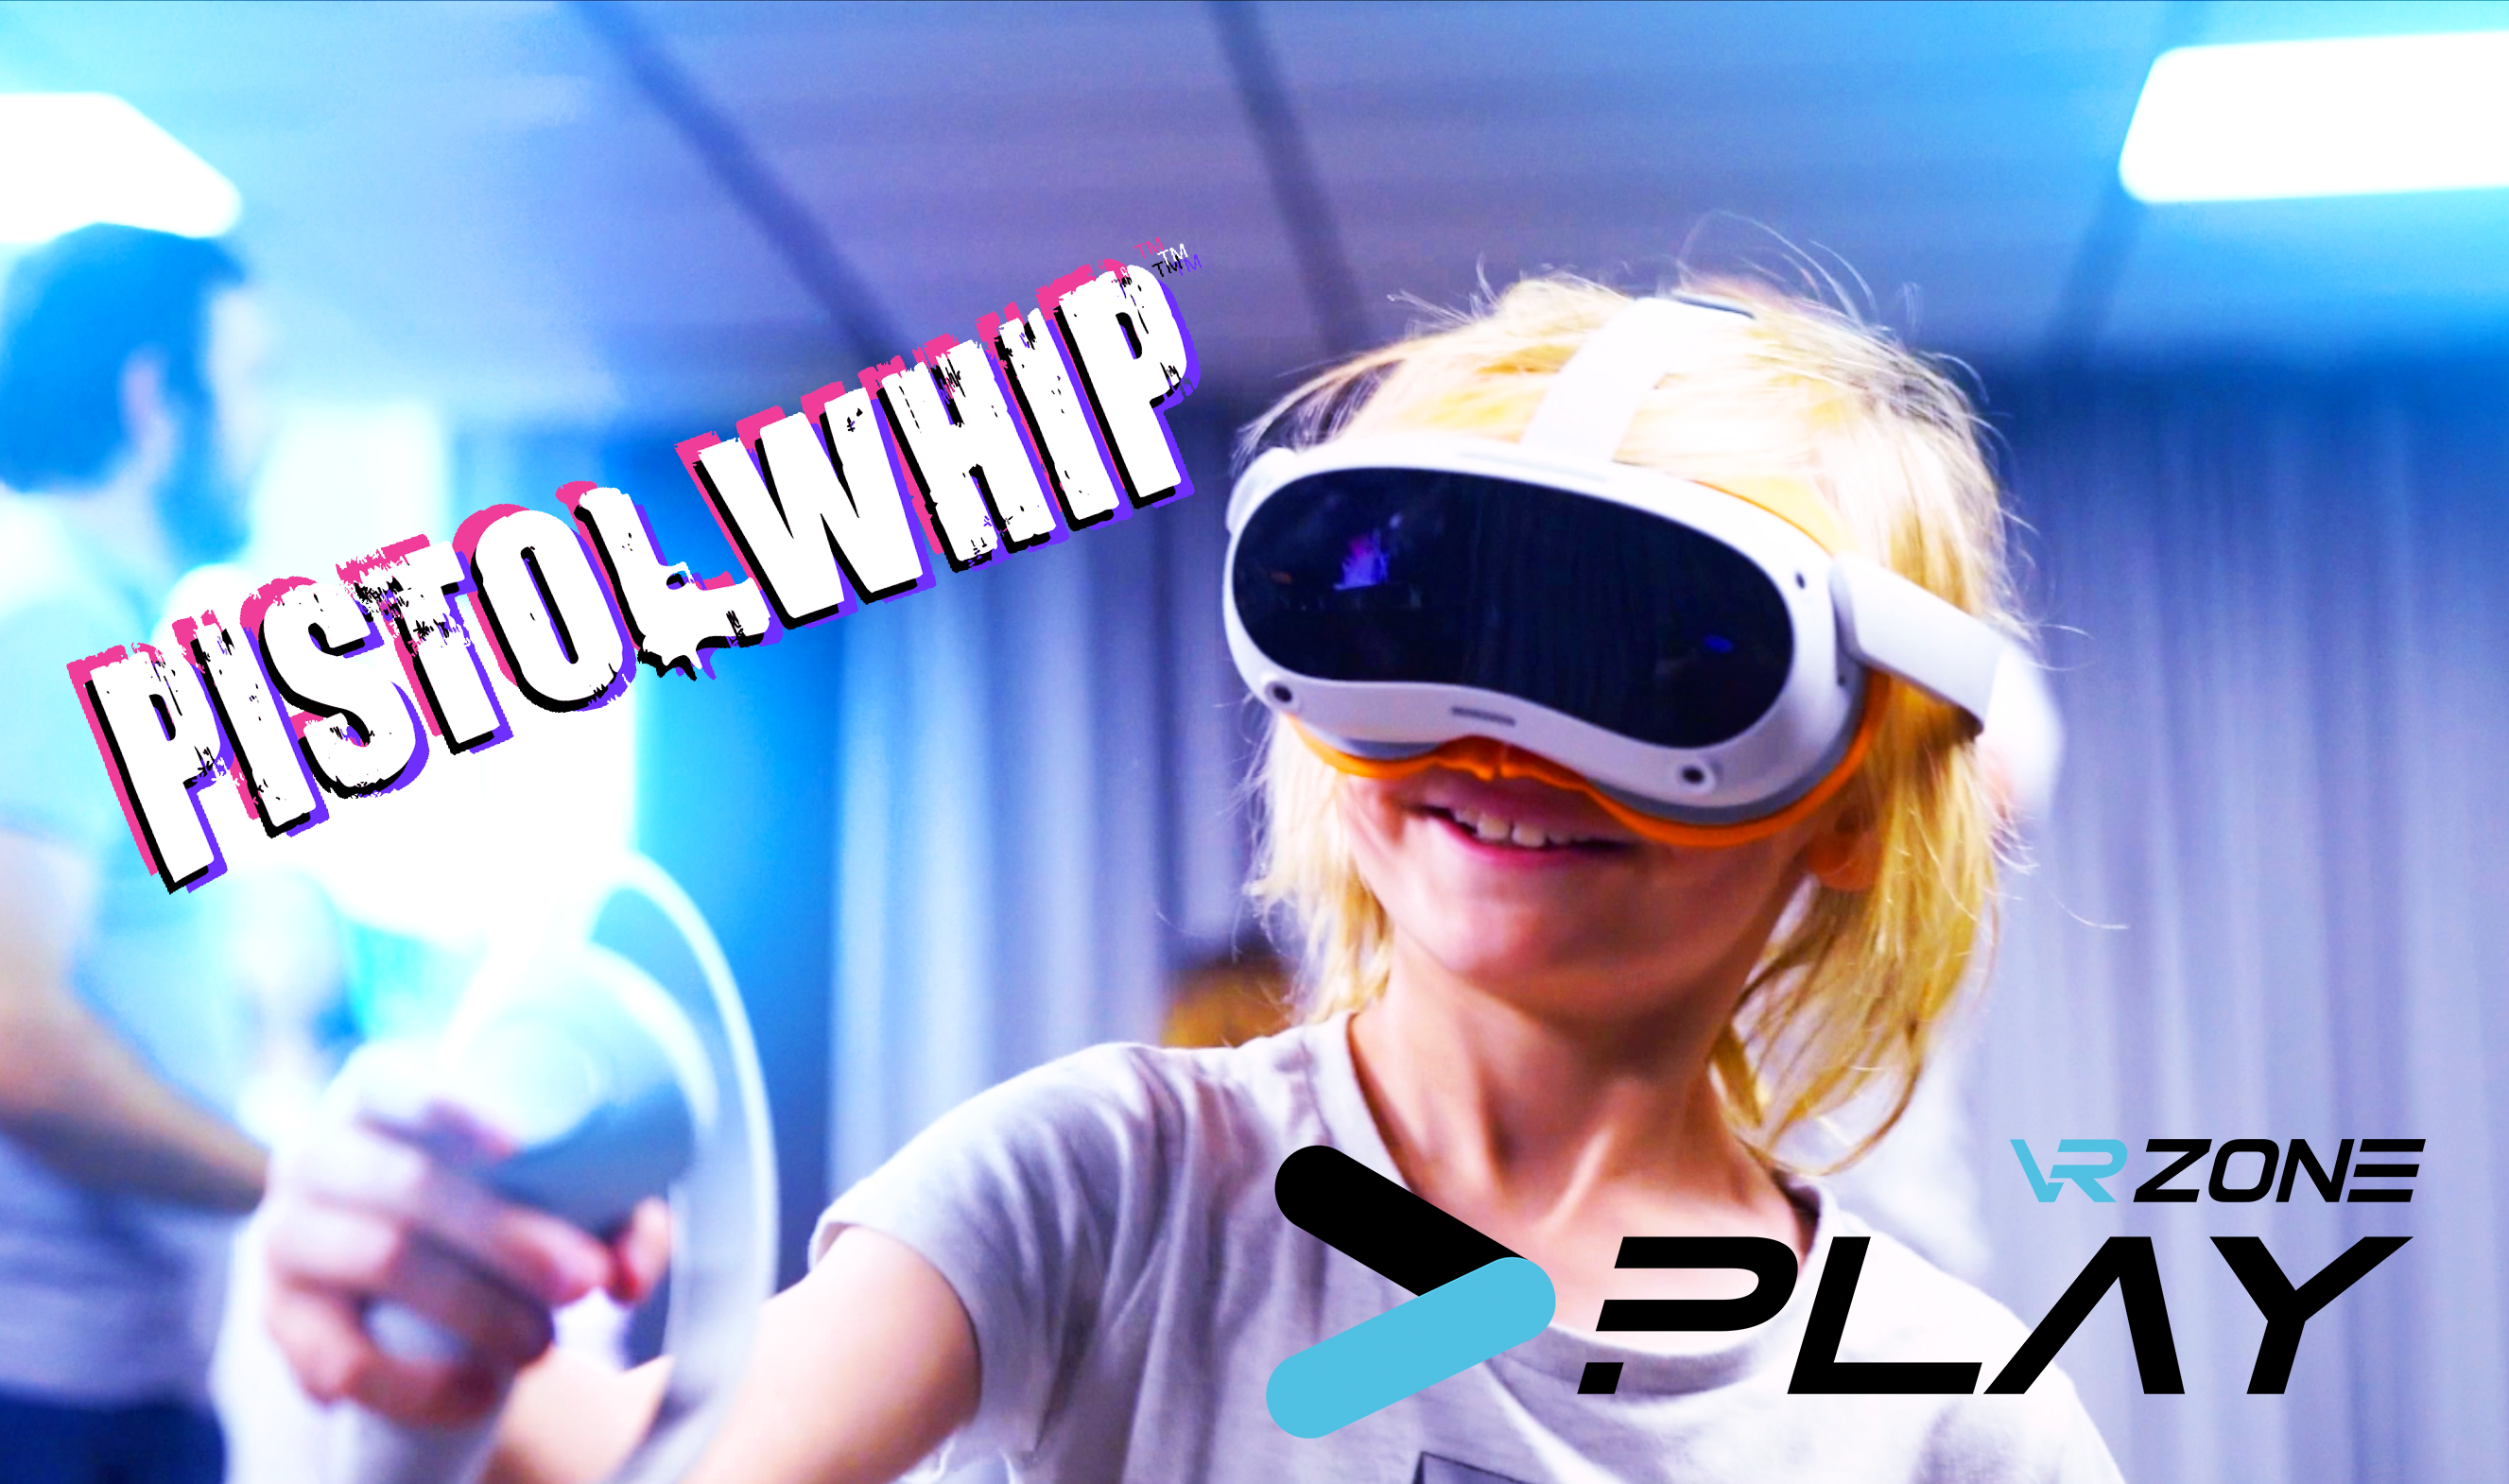 Load video: Play pistolwhip at VR Zone Play